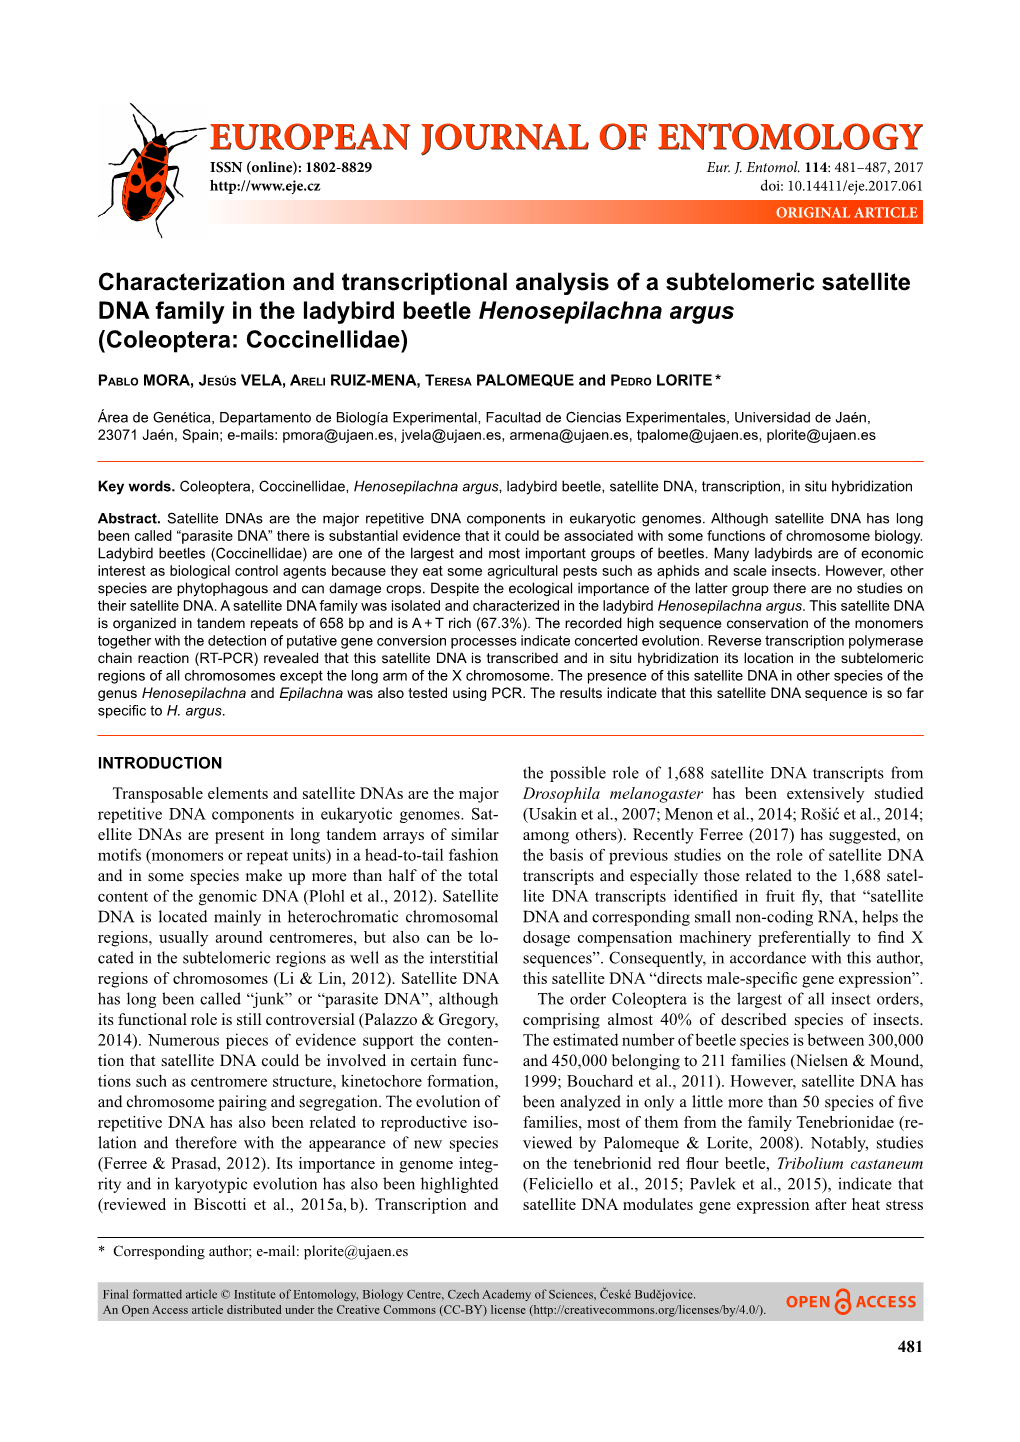 Characterization and Transcriptional Analysis of a Subtelomeric Satellite DNA Family in the Ladybird Beetle Henosepilachna Argus (Coleoptera: Coccinellidae)